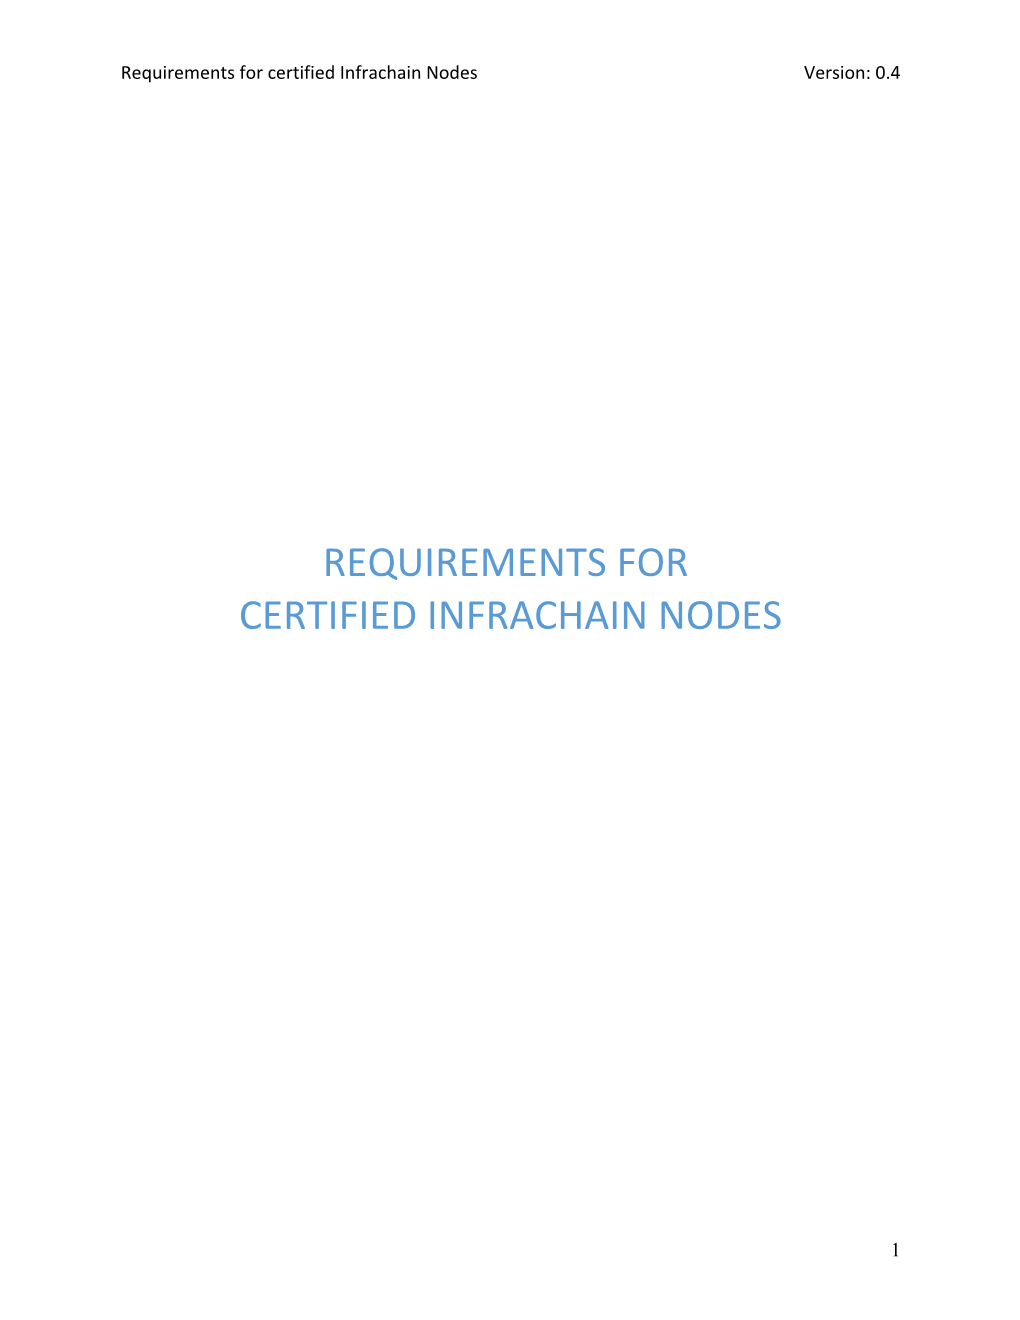 Requirements for Certified Infrachain Nodes